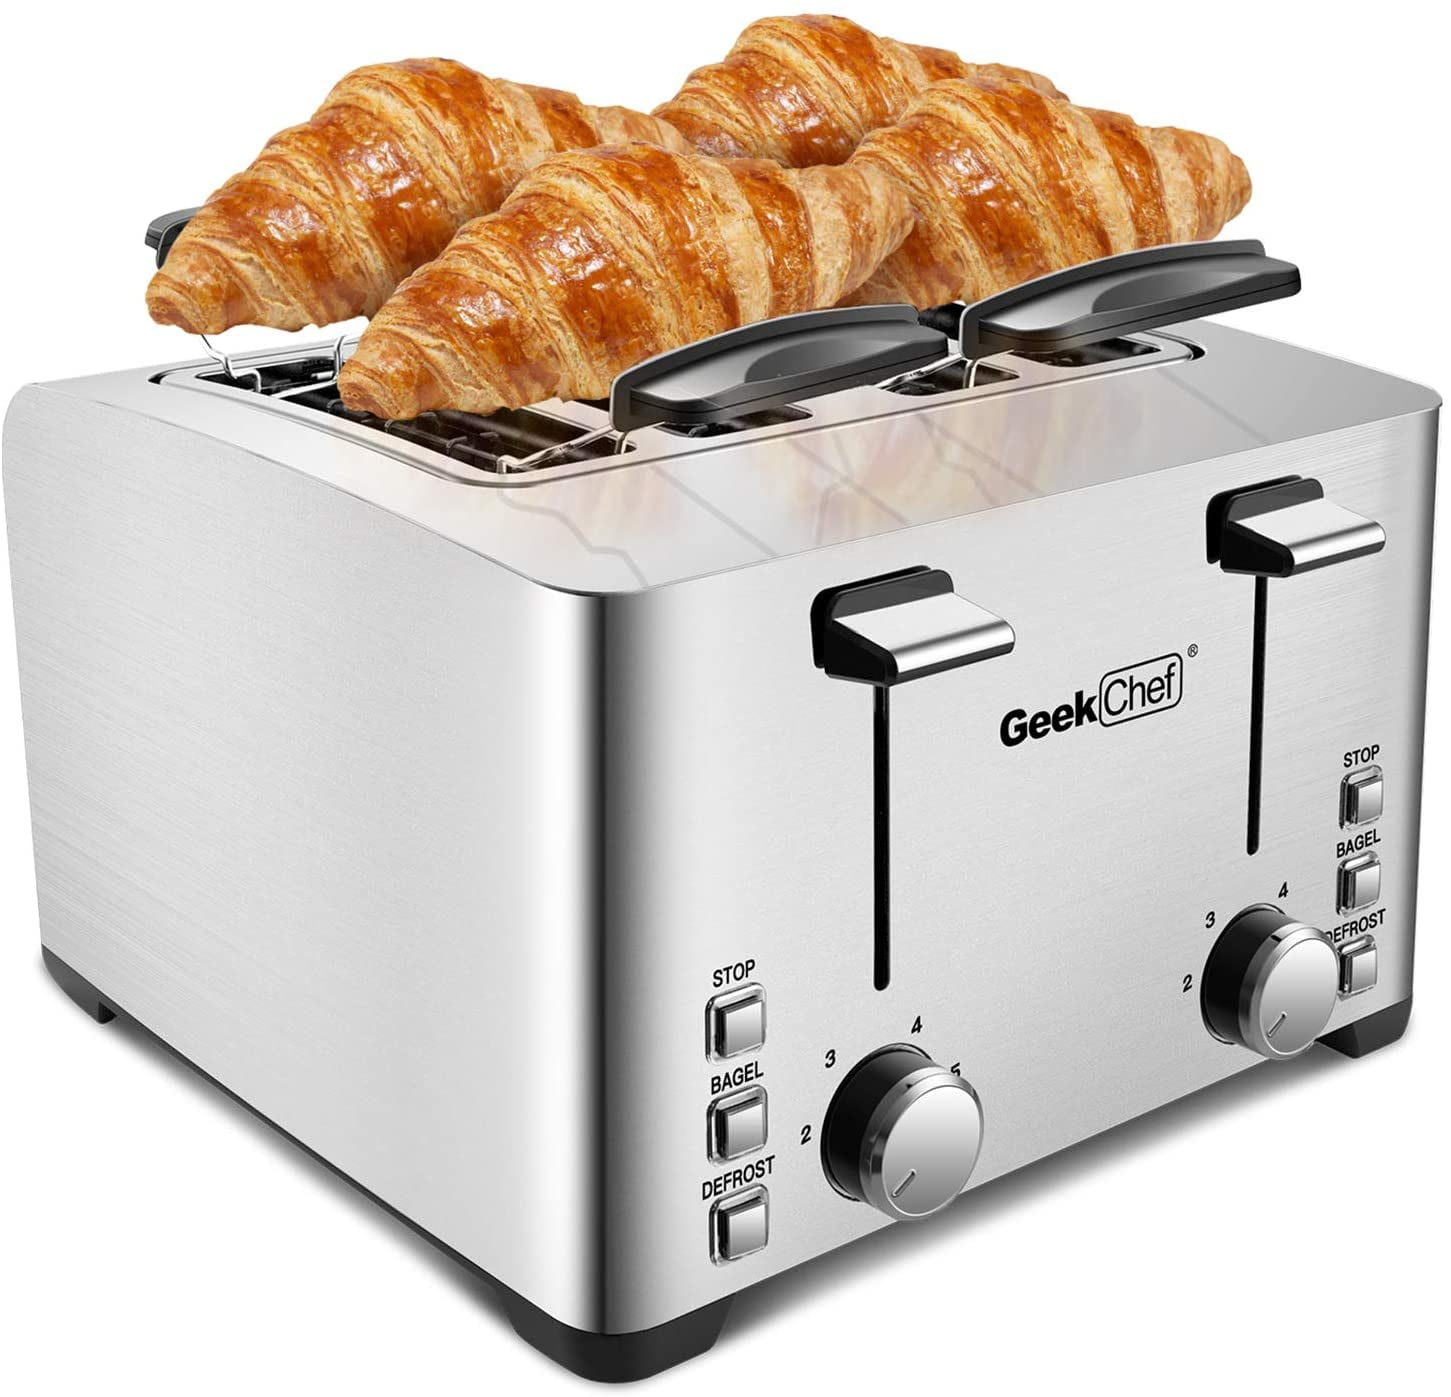 Black MIC Toaster 2 Slice Wide Slot 825 W 6 Browning Settings,Polished Stainless Steel Housing Toaster with Cancel/Bagel/Reheat/Defrost High-Lift